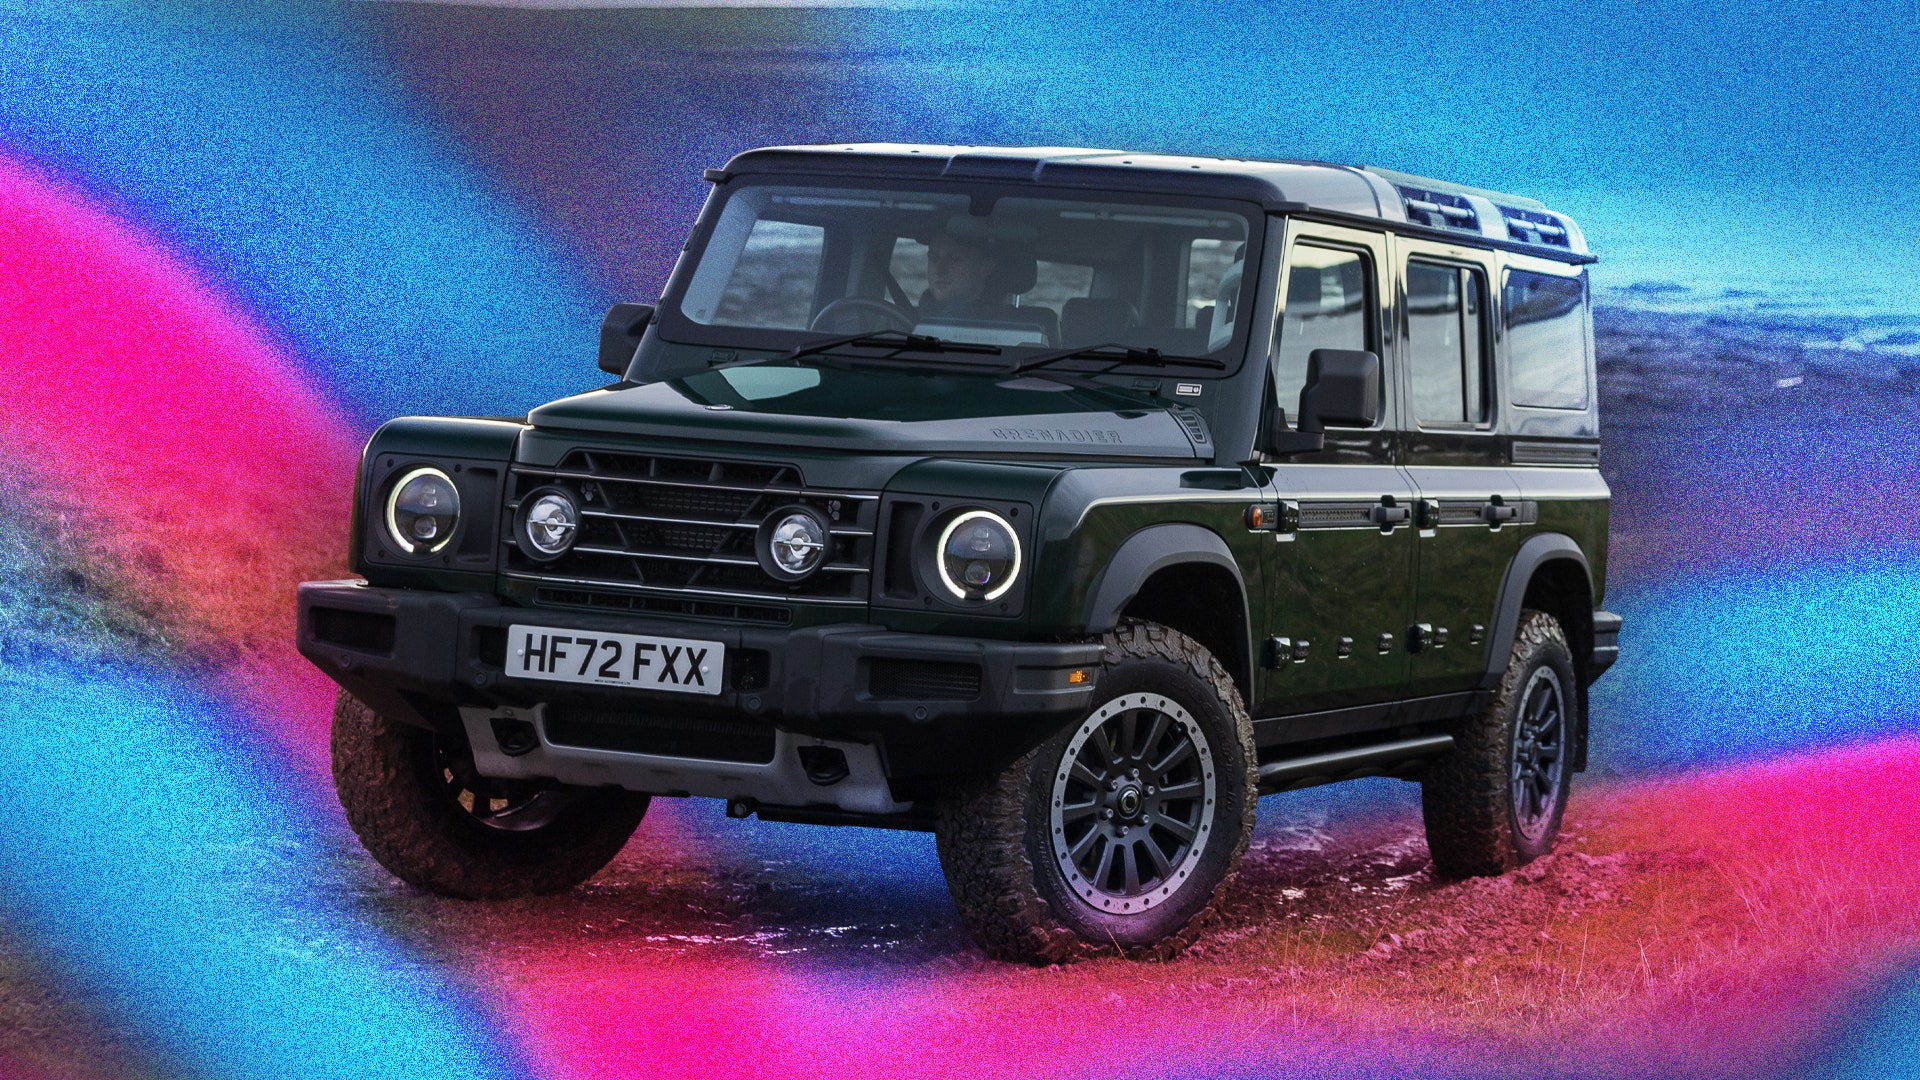 Ineos Grenadier V8 will not be a LandCruiser 70 Series replacement